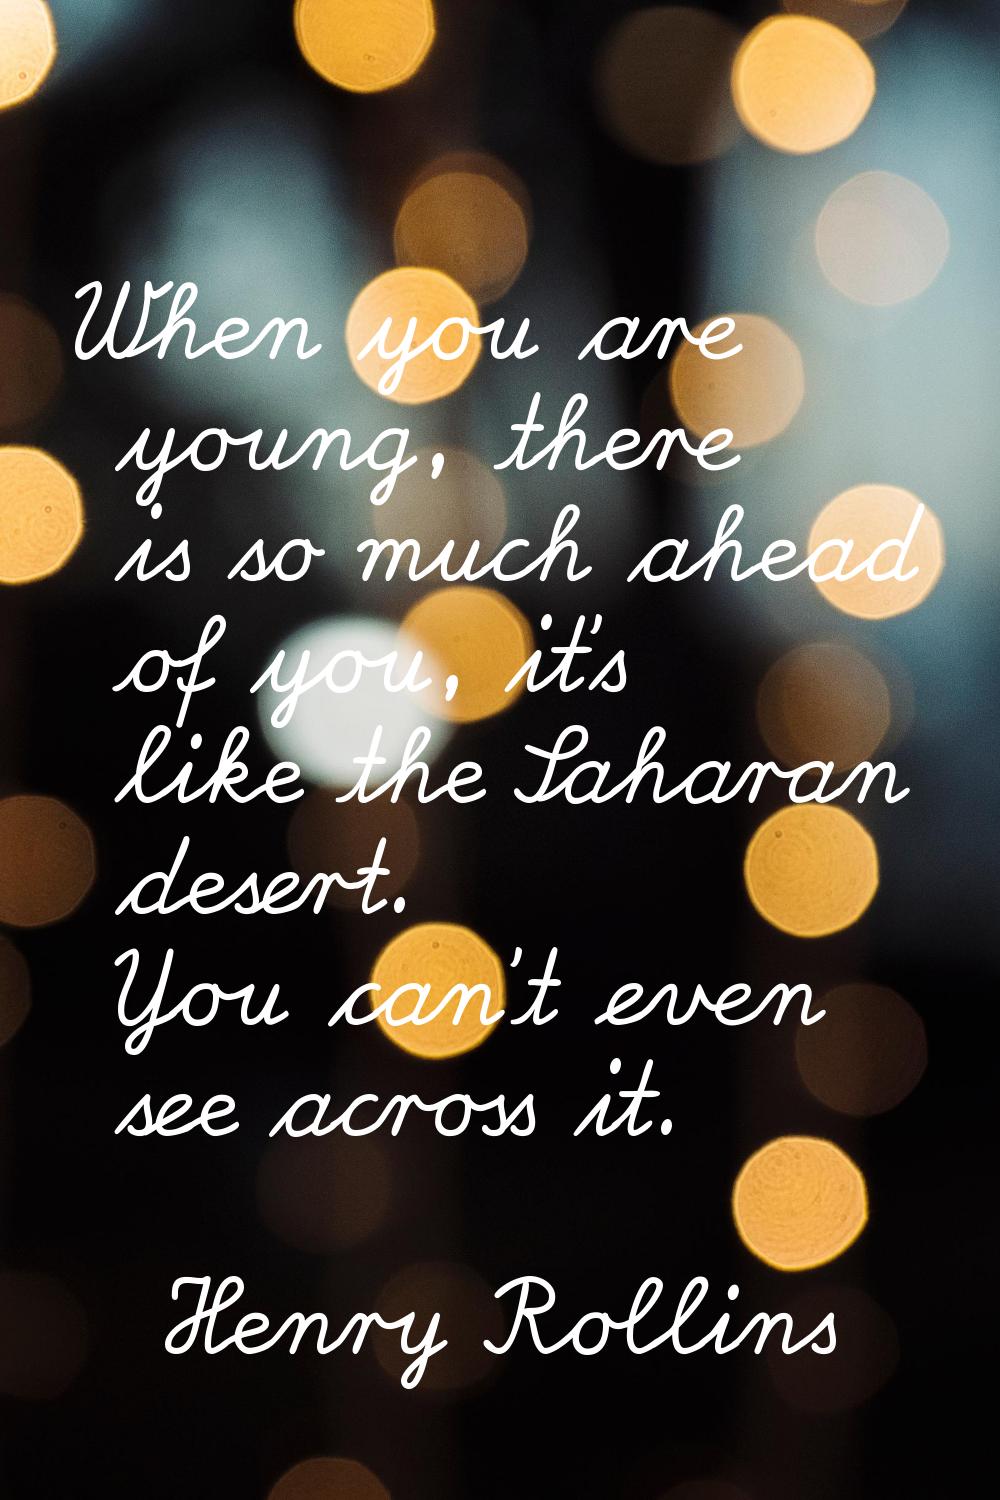 When you are young, there is so much ahead of you, it's like the Saharan desert. You can't even see